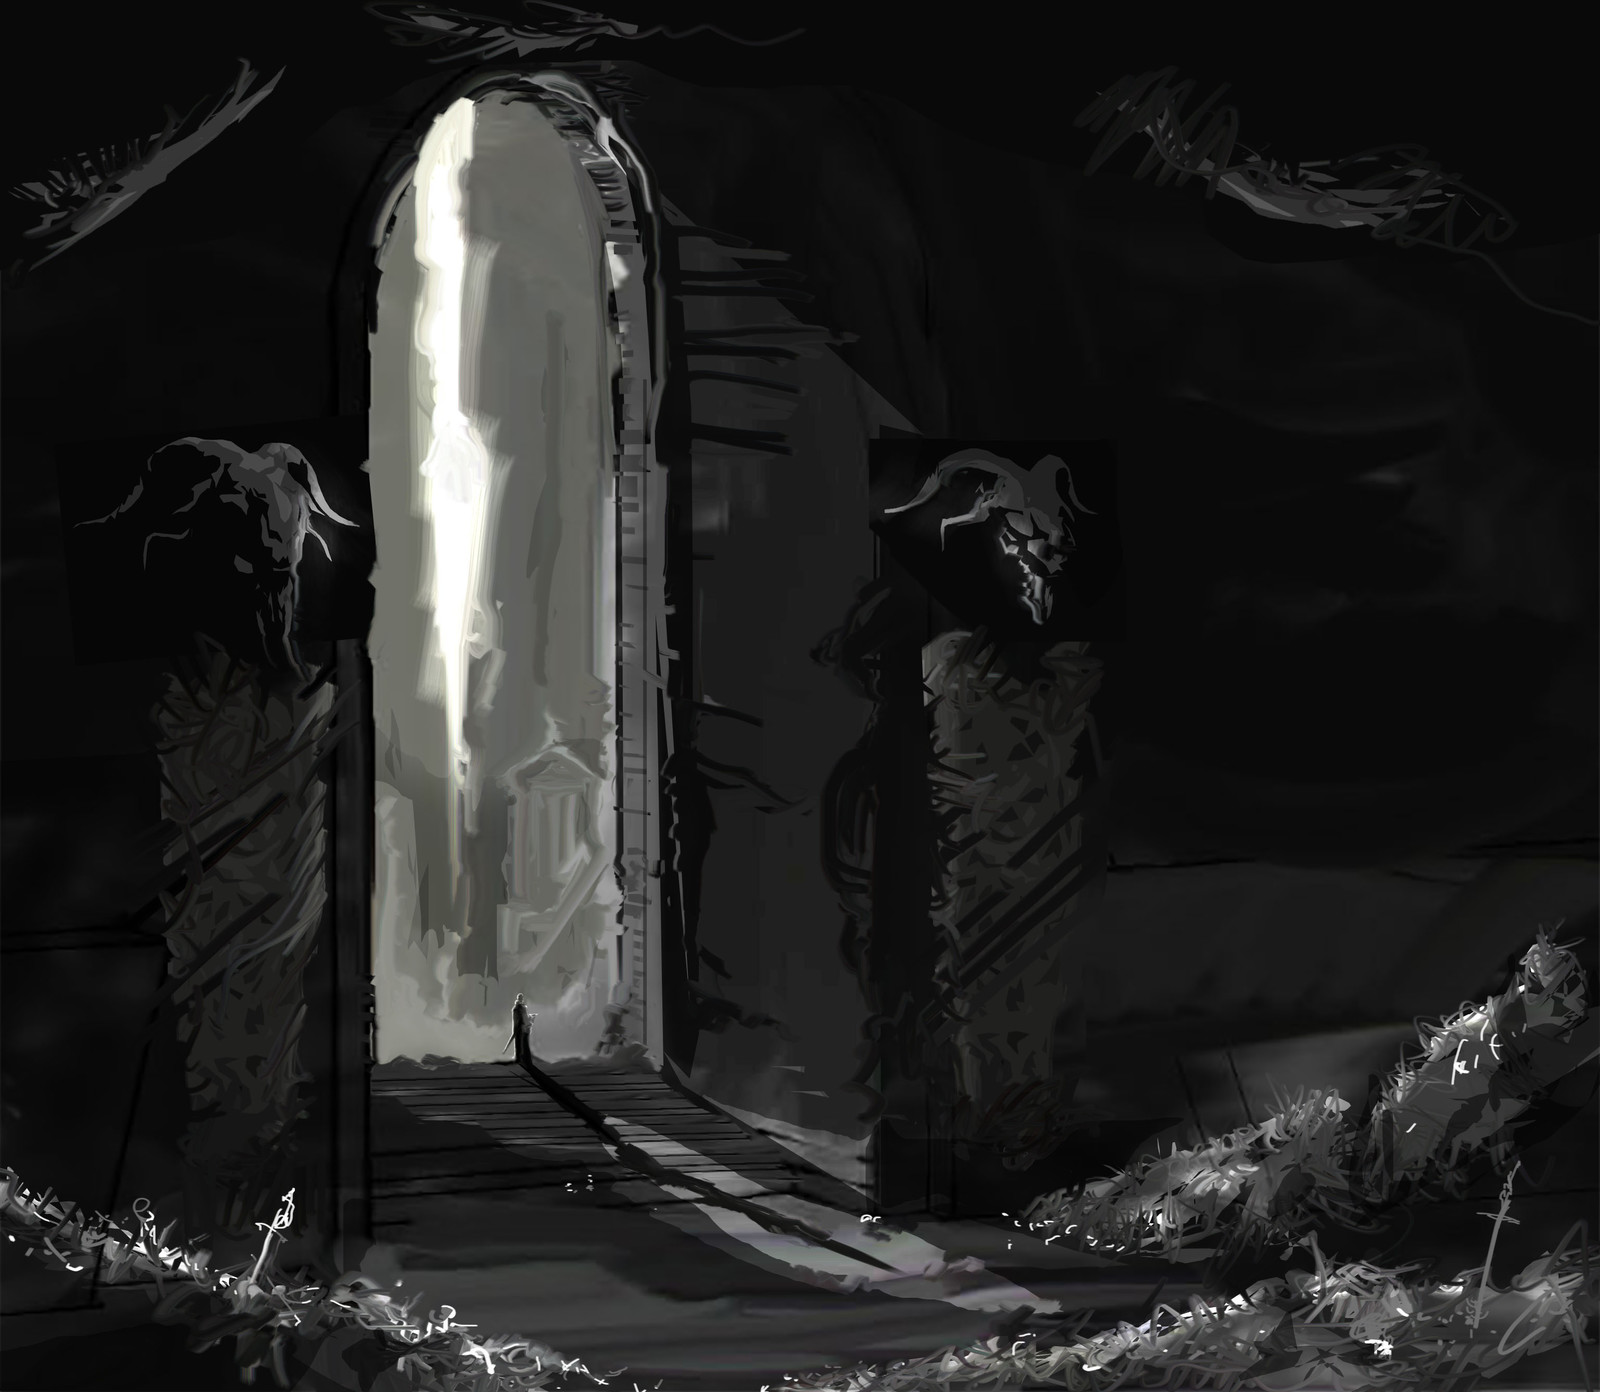 Looking at the exploration "Contrasts" in the design phase. Here contrasts in scale - huge door, tiny figure. We also have secondary contrasts, that of light - bright welcoming exterior, dark and foreboding  interior...